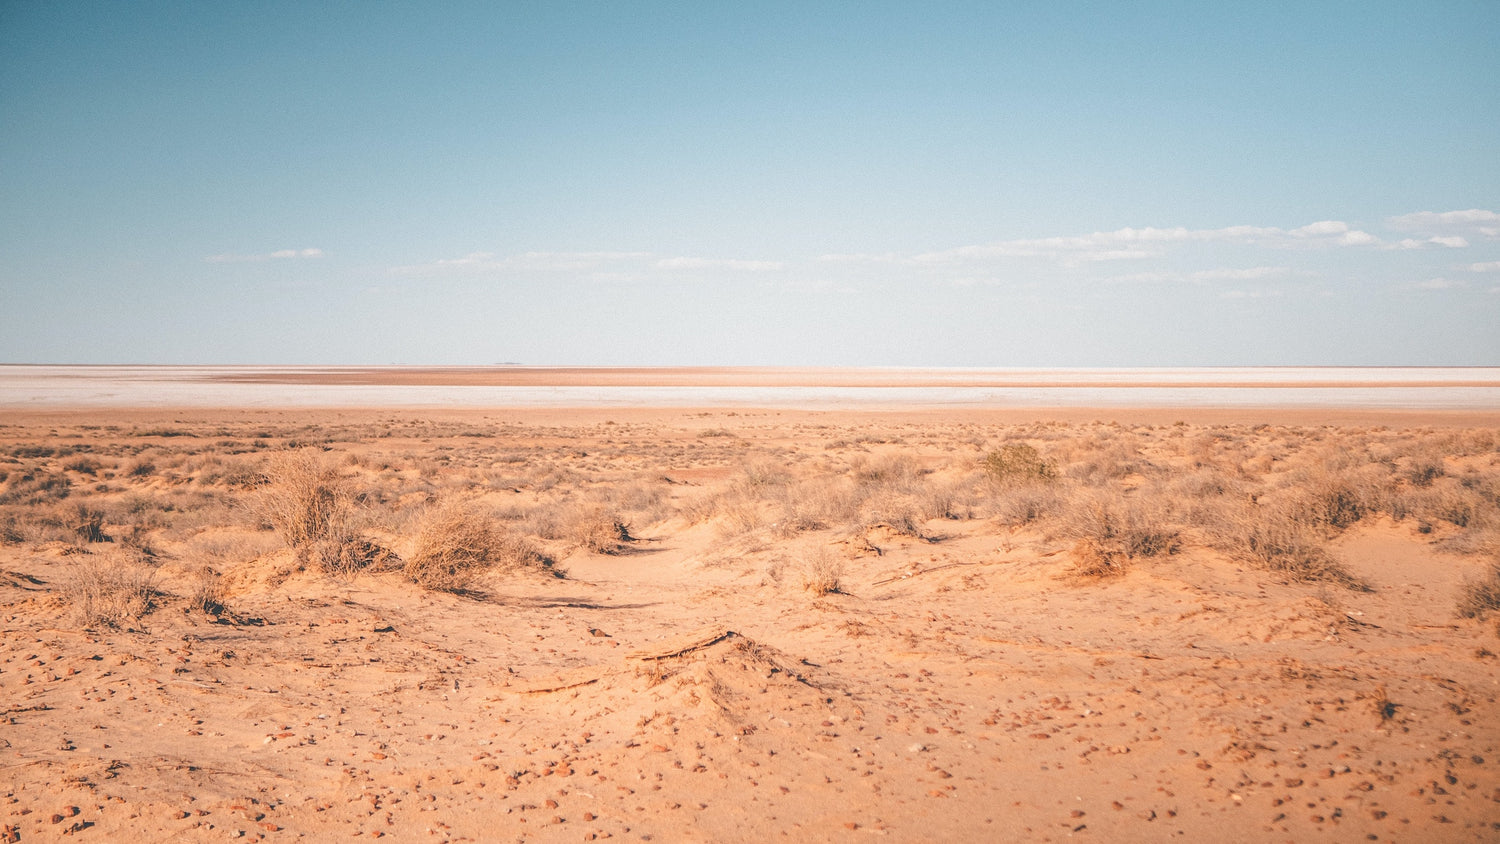 Looni blog post with photo by @simonmaisch on https://unsplash.com/images/nature/desert